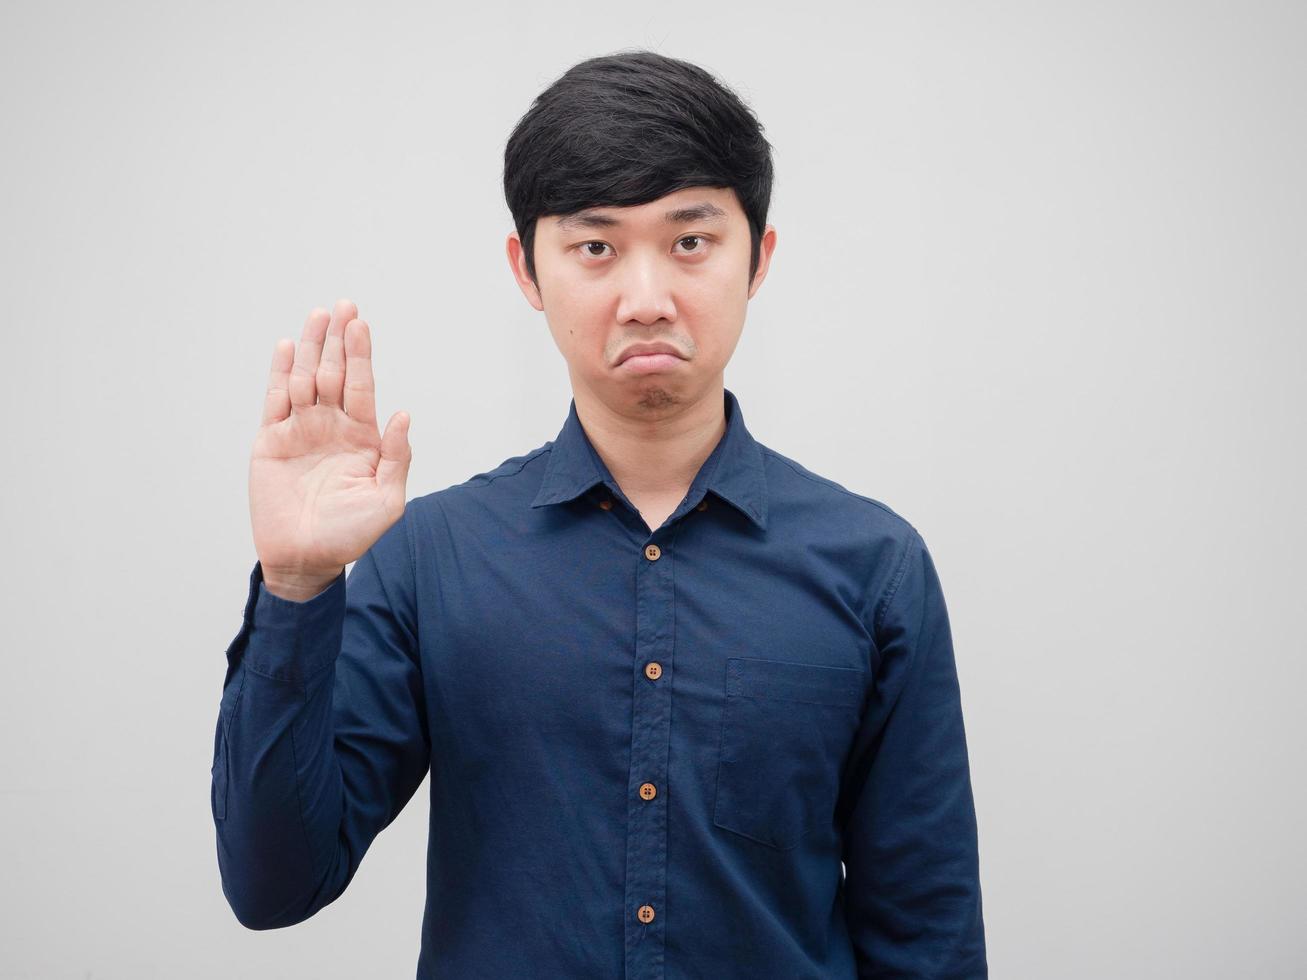 Man felling bored and show one hand up on white background photo